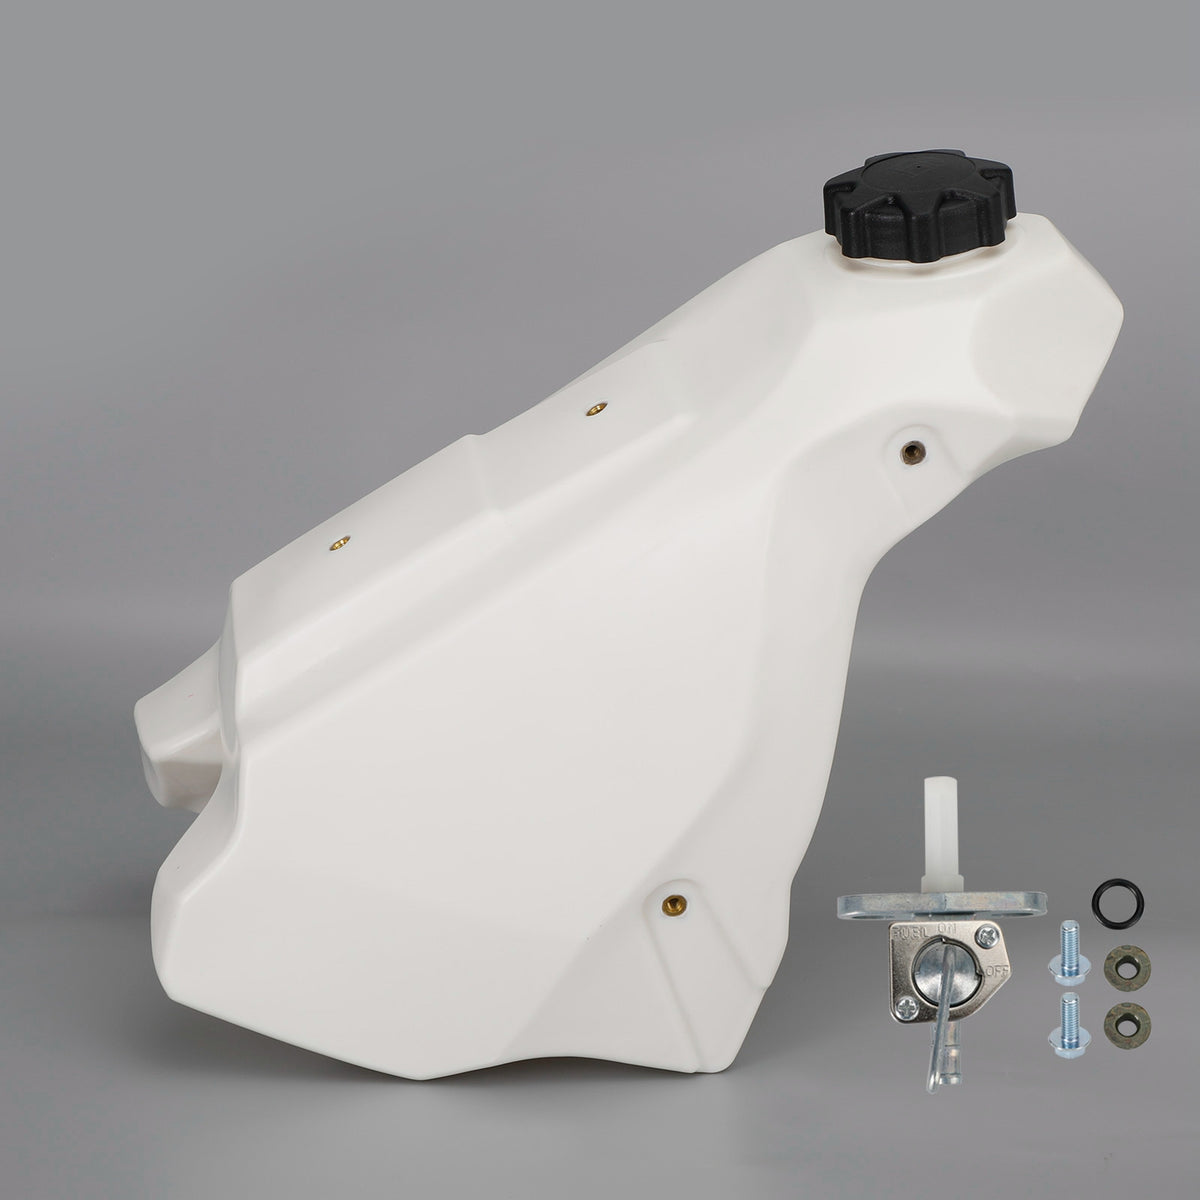 3.6 Gal Large Capacity Gas FUEL Tank White For Honda CR 500R CR500R 1989-2001 Generic FedEx Express Shipping